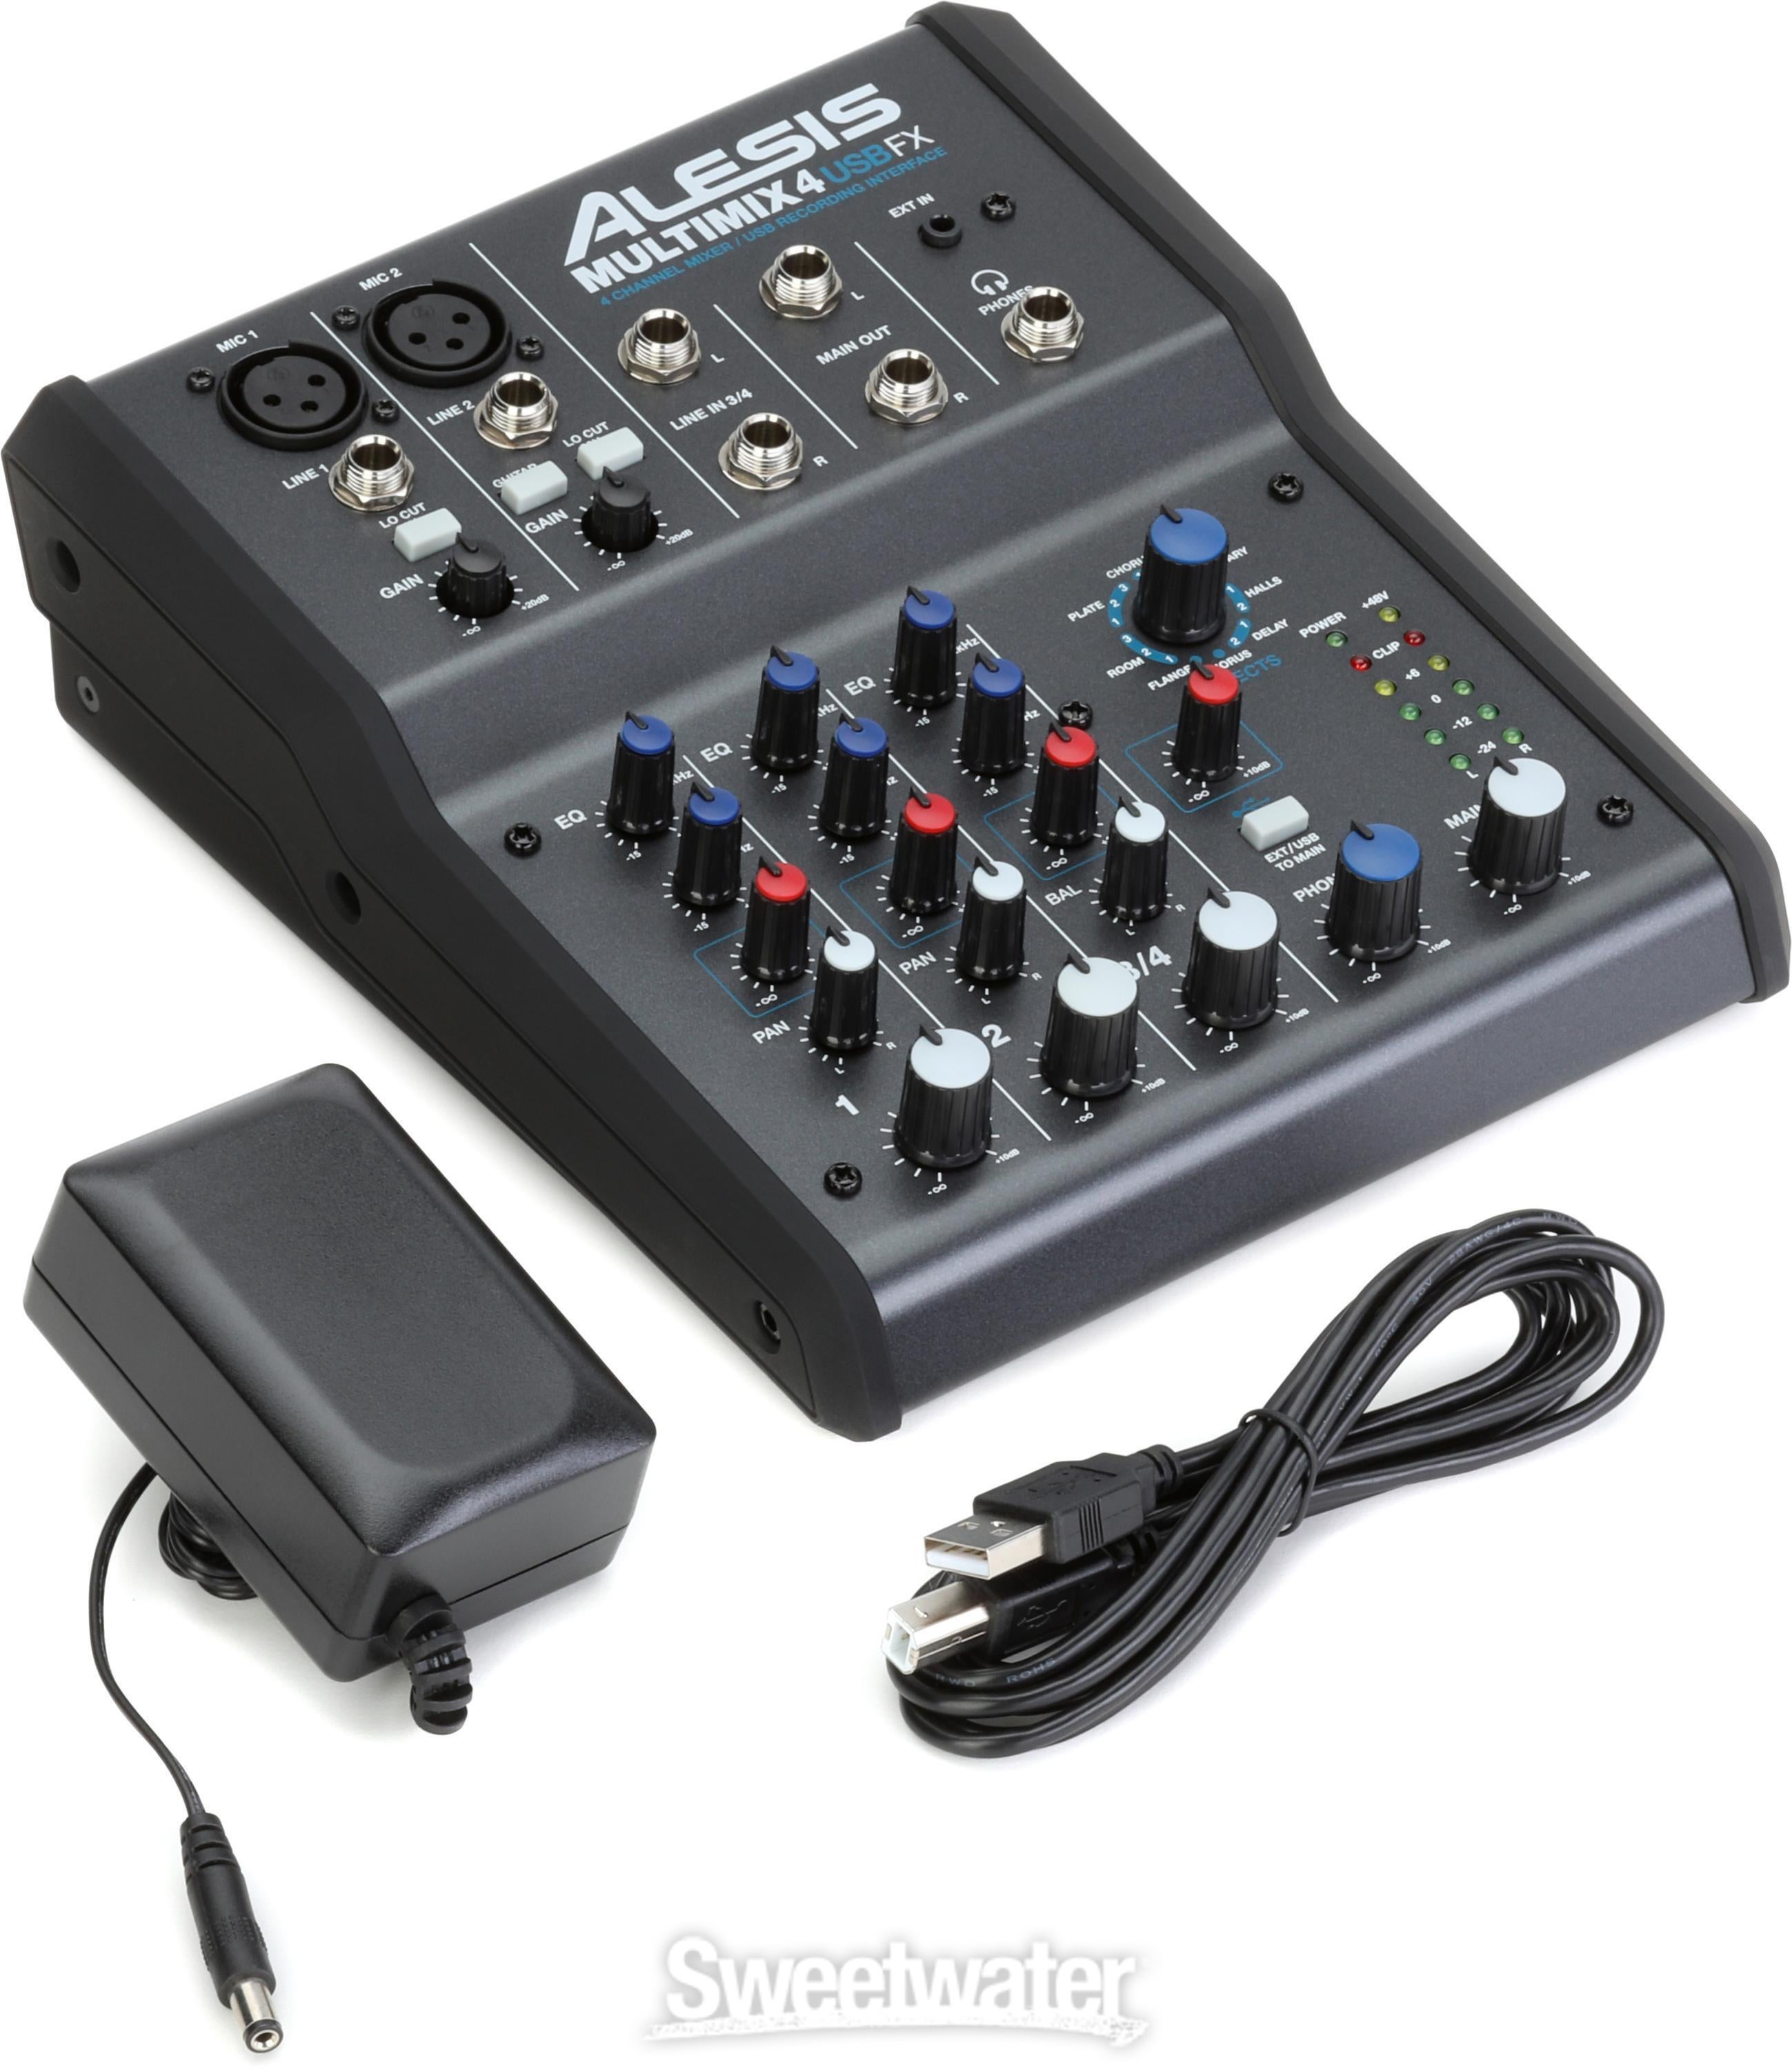 Alesis Multimix 4 USB FX Mixer with USB & Effects | Sweetwater